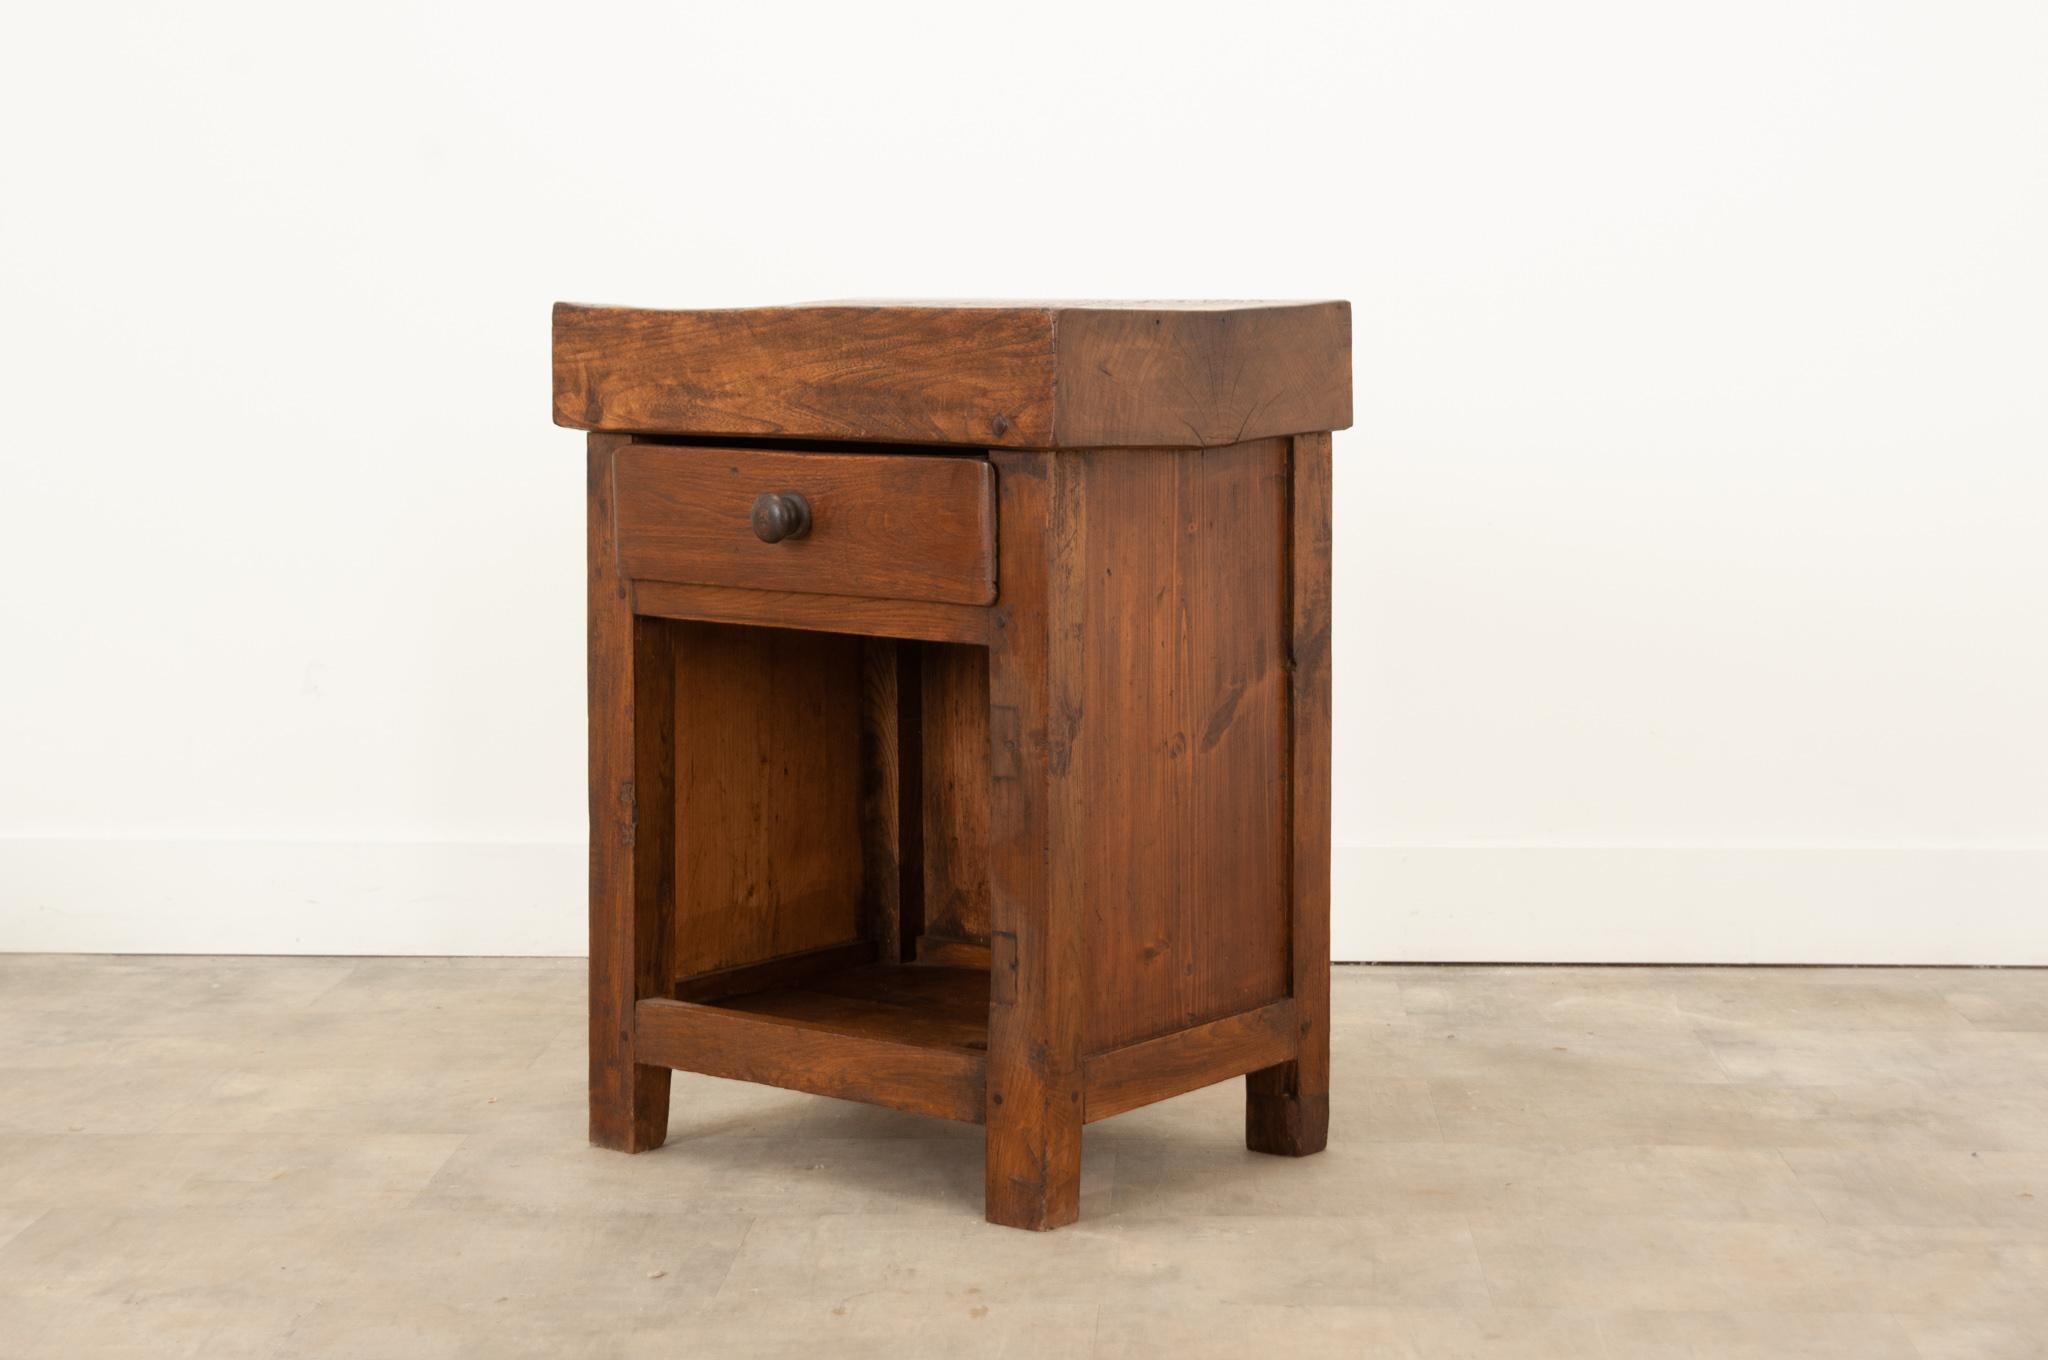 This superb antique chopping block cabinet was hand-crafted in France circa 1850. Wonderfully worn with much time and use, the cut marks from bygone chefs on the thick block top are a prominent feature. Well constructed this cabinet exhibits peg and